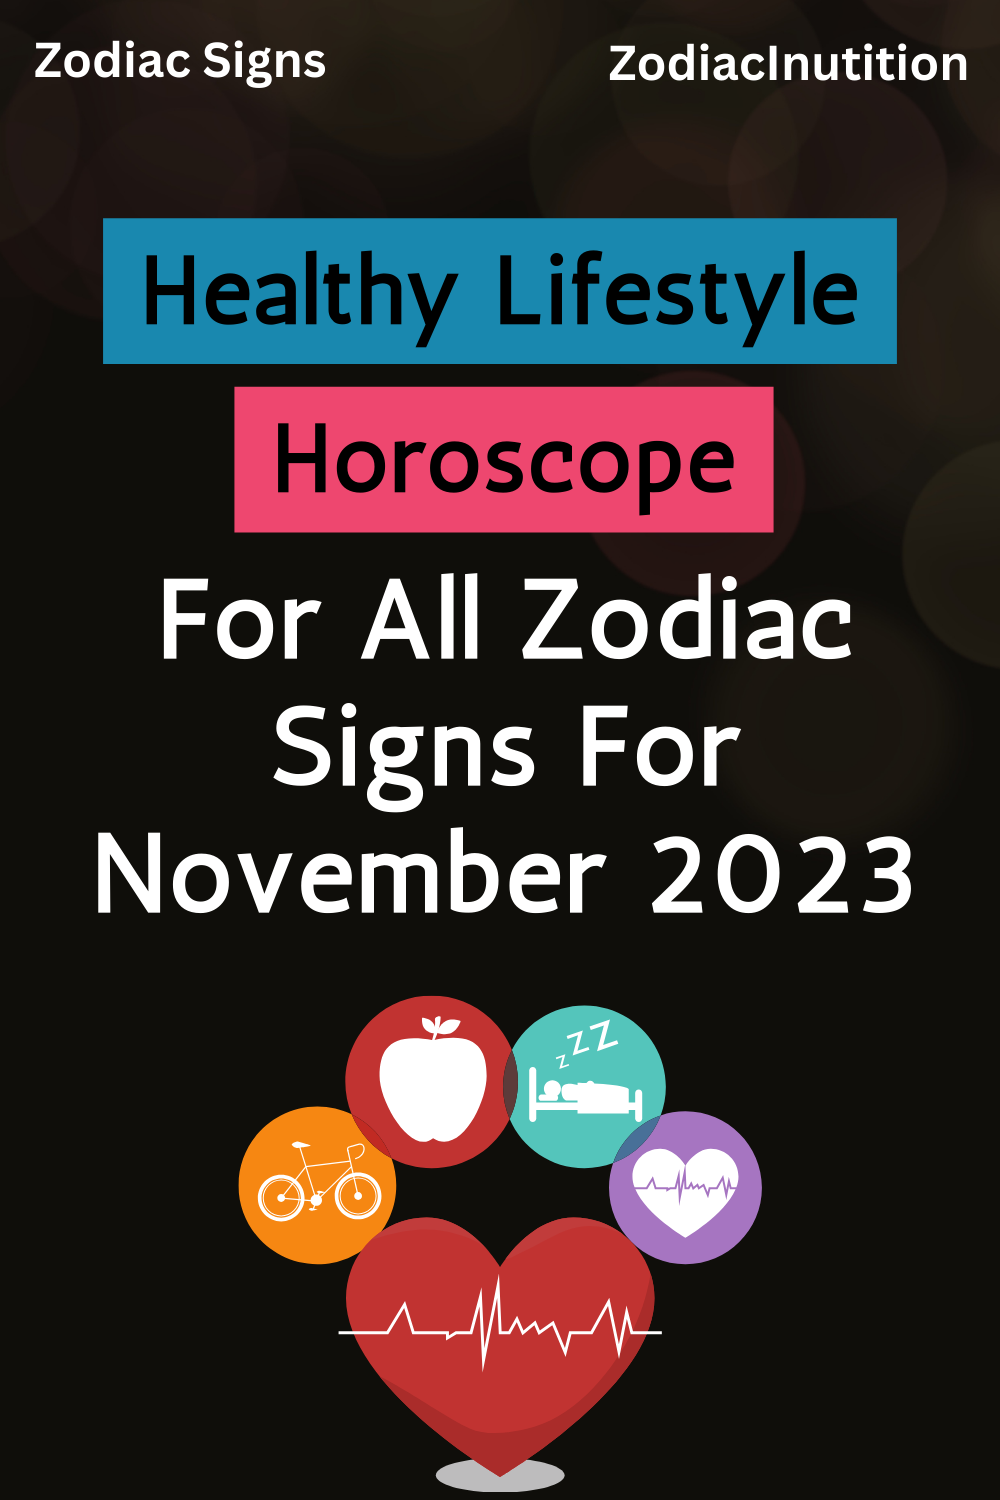 Healthy Lifestyle Horoscope For All Zodiac Signs For November 2023